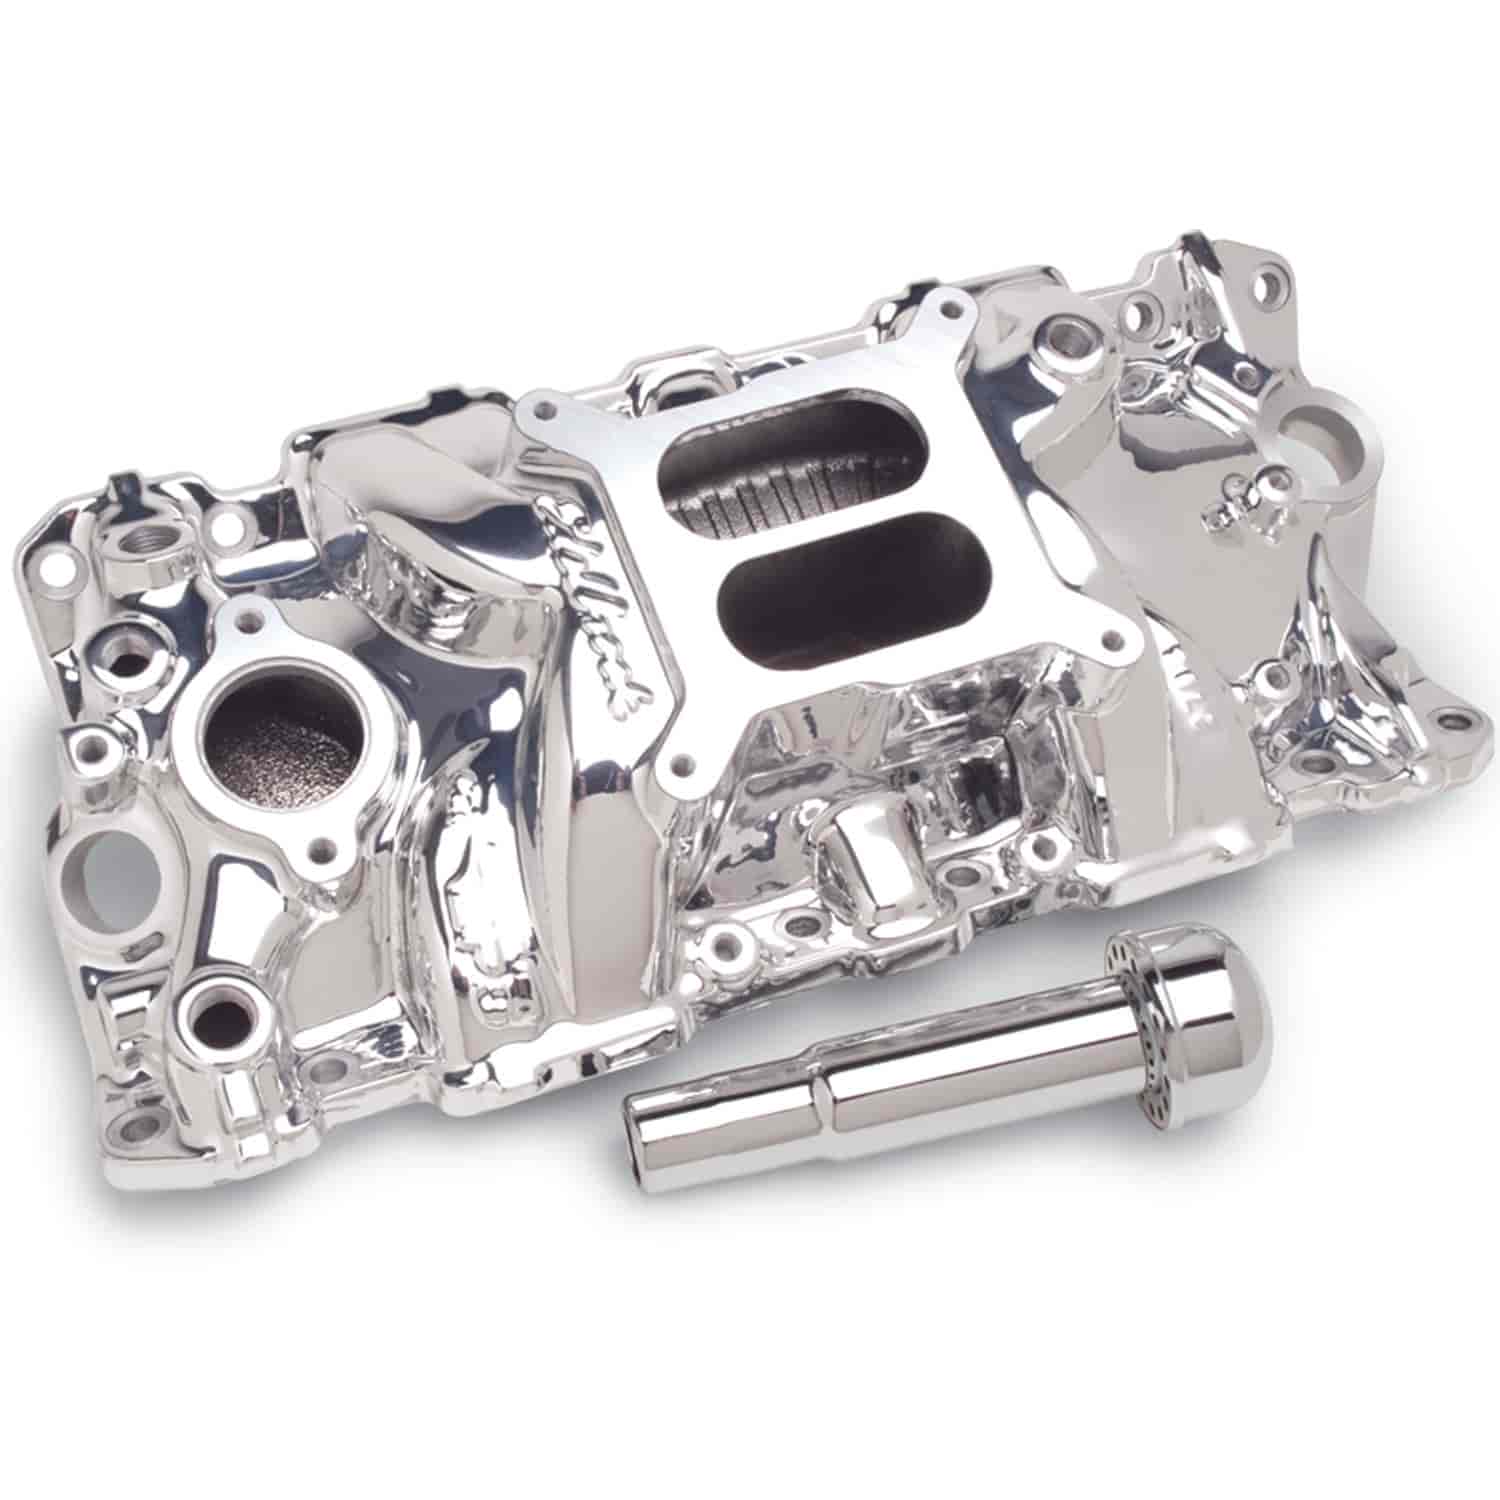 Performer EPS Endurashine Intake Manifold for Small Block Chevy with Oil Fill Tube